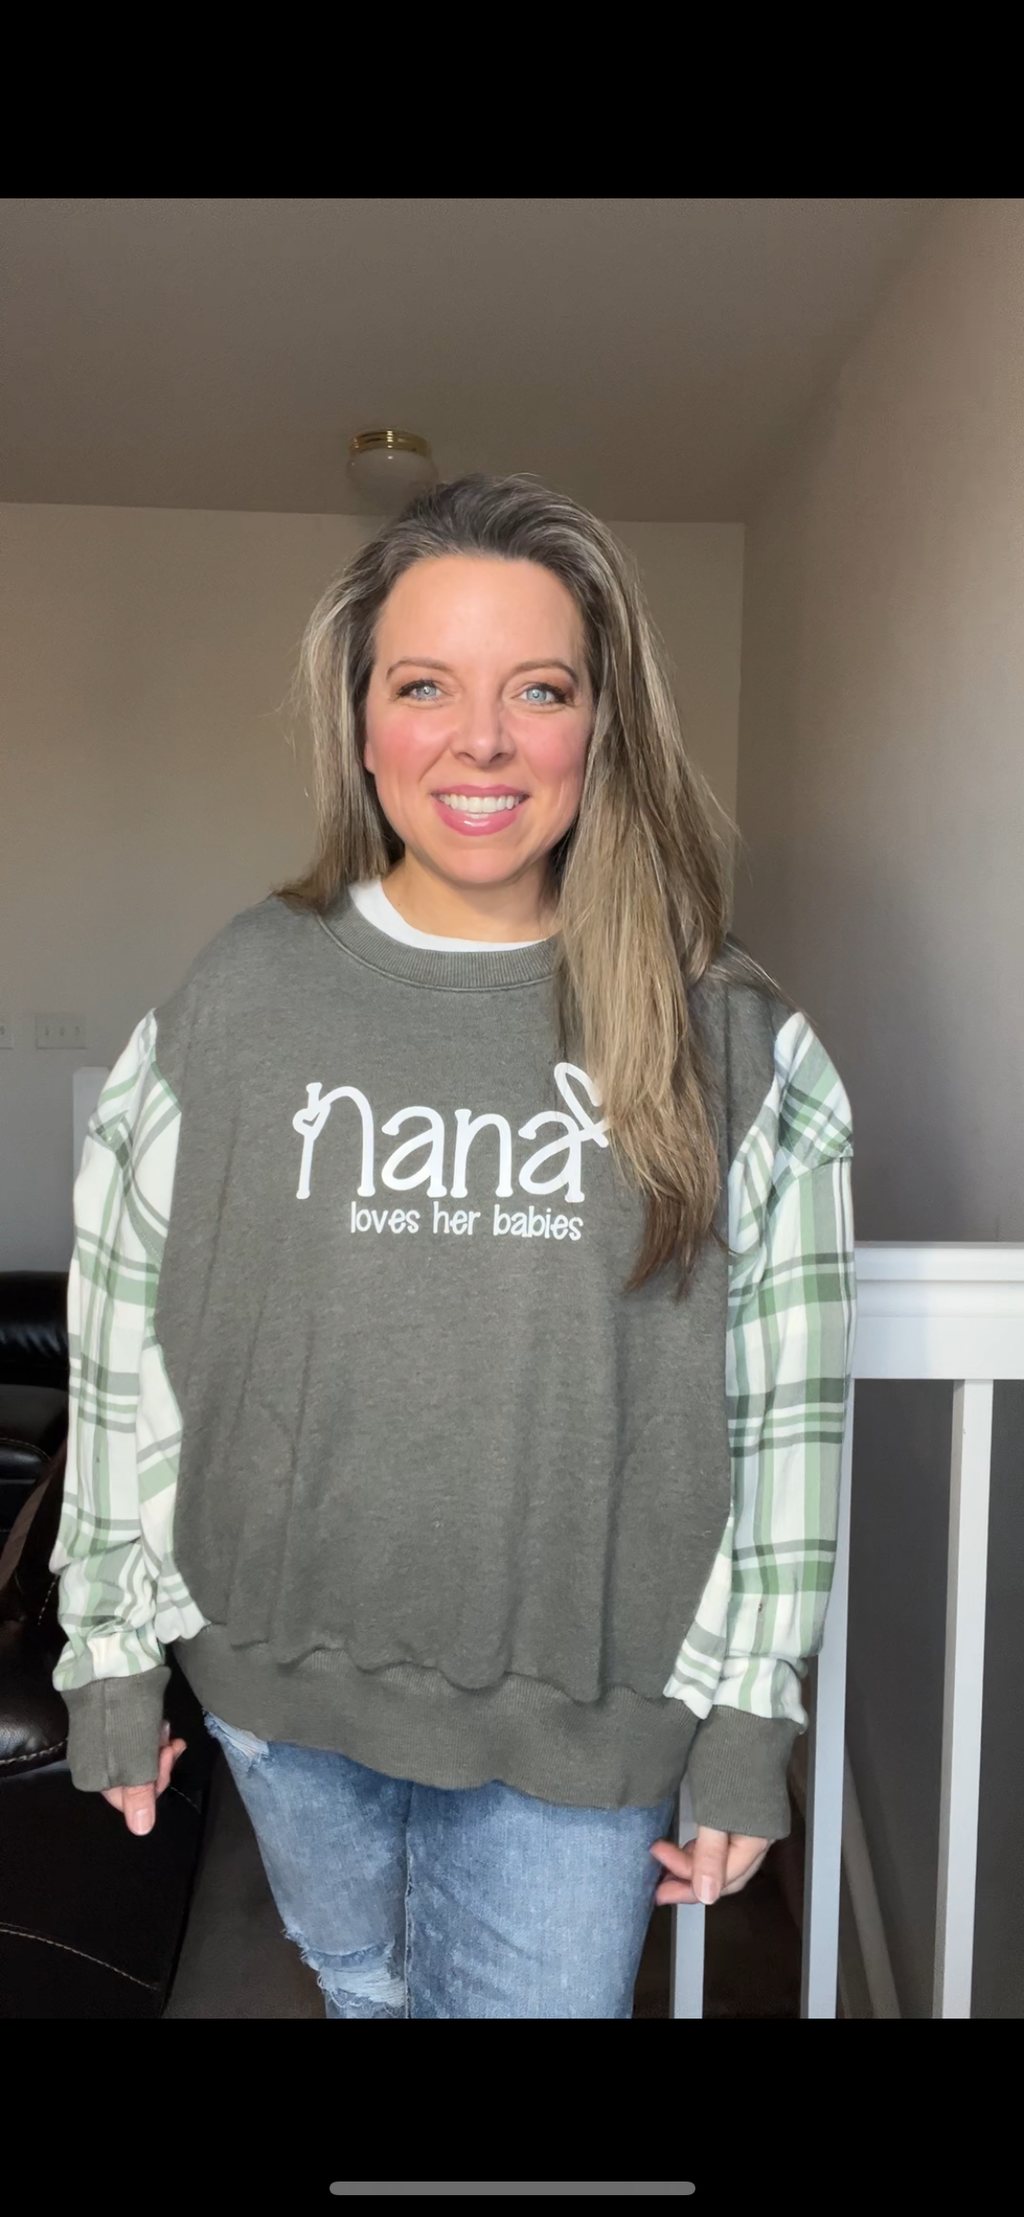 Upcycled NaNa - Women’s XL – thin sweatshirt with soft flannel sleeves wide but shorter in length￼